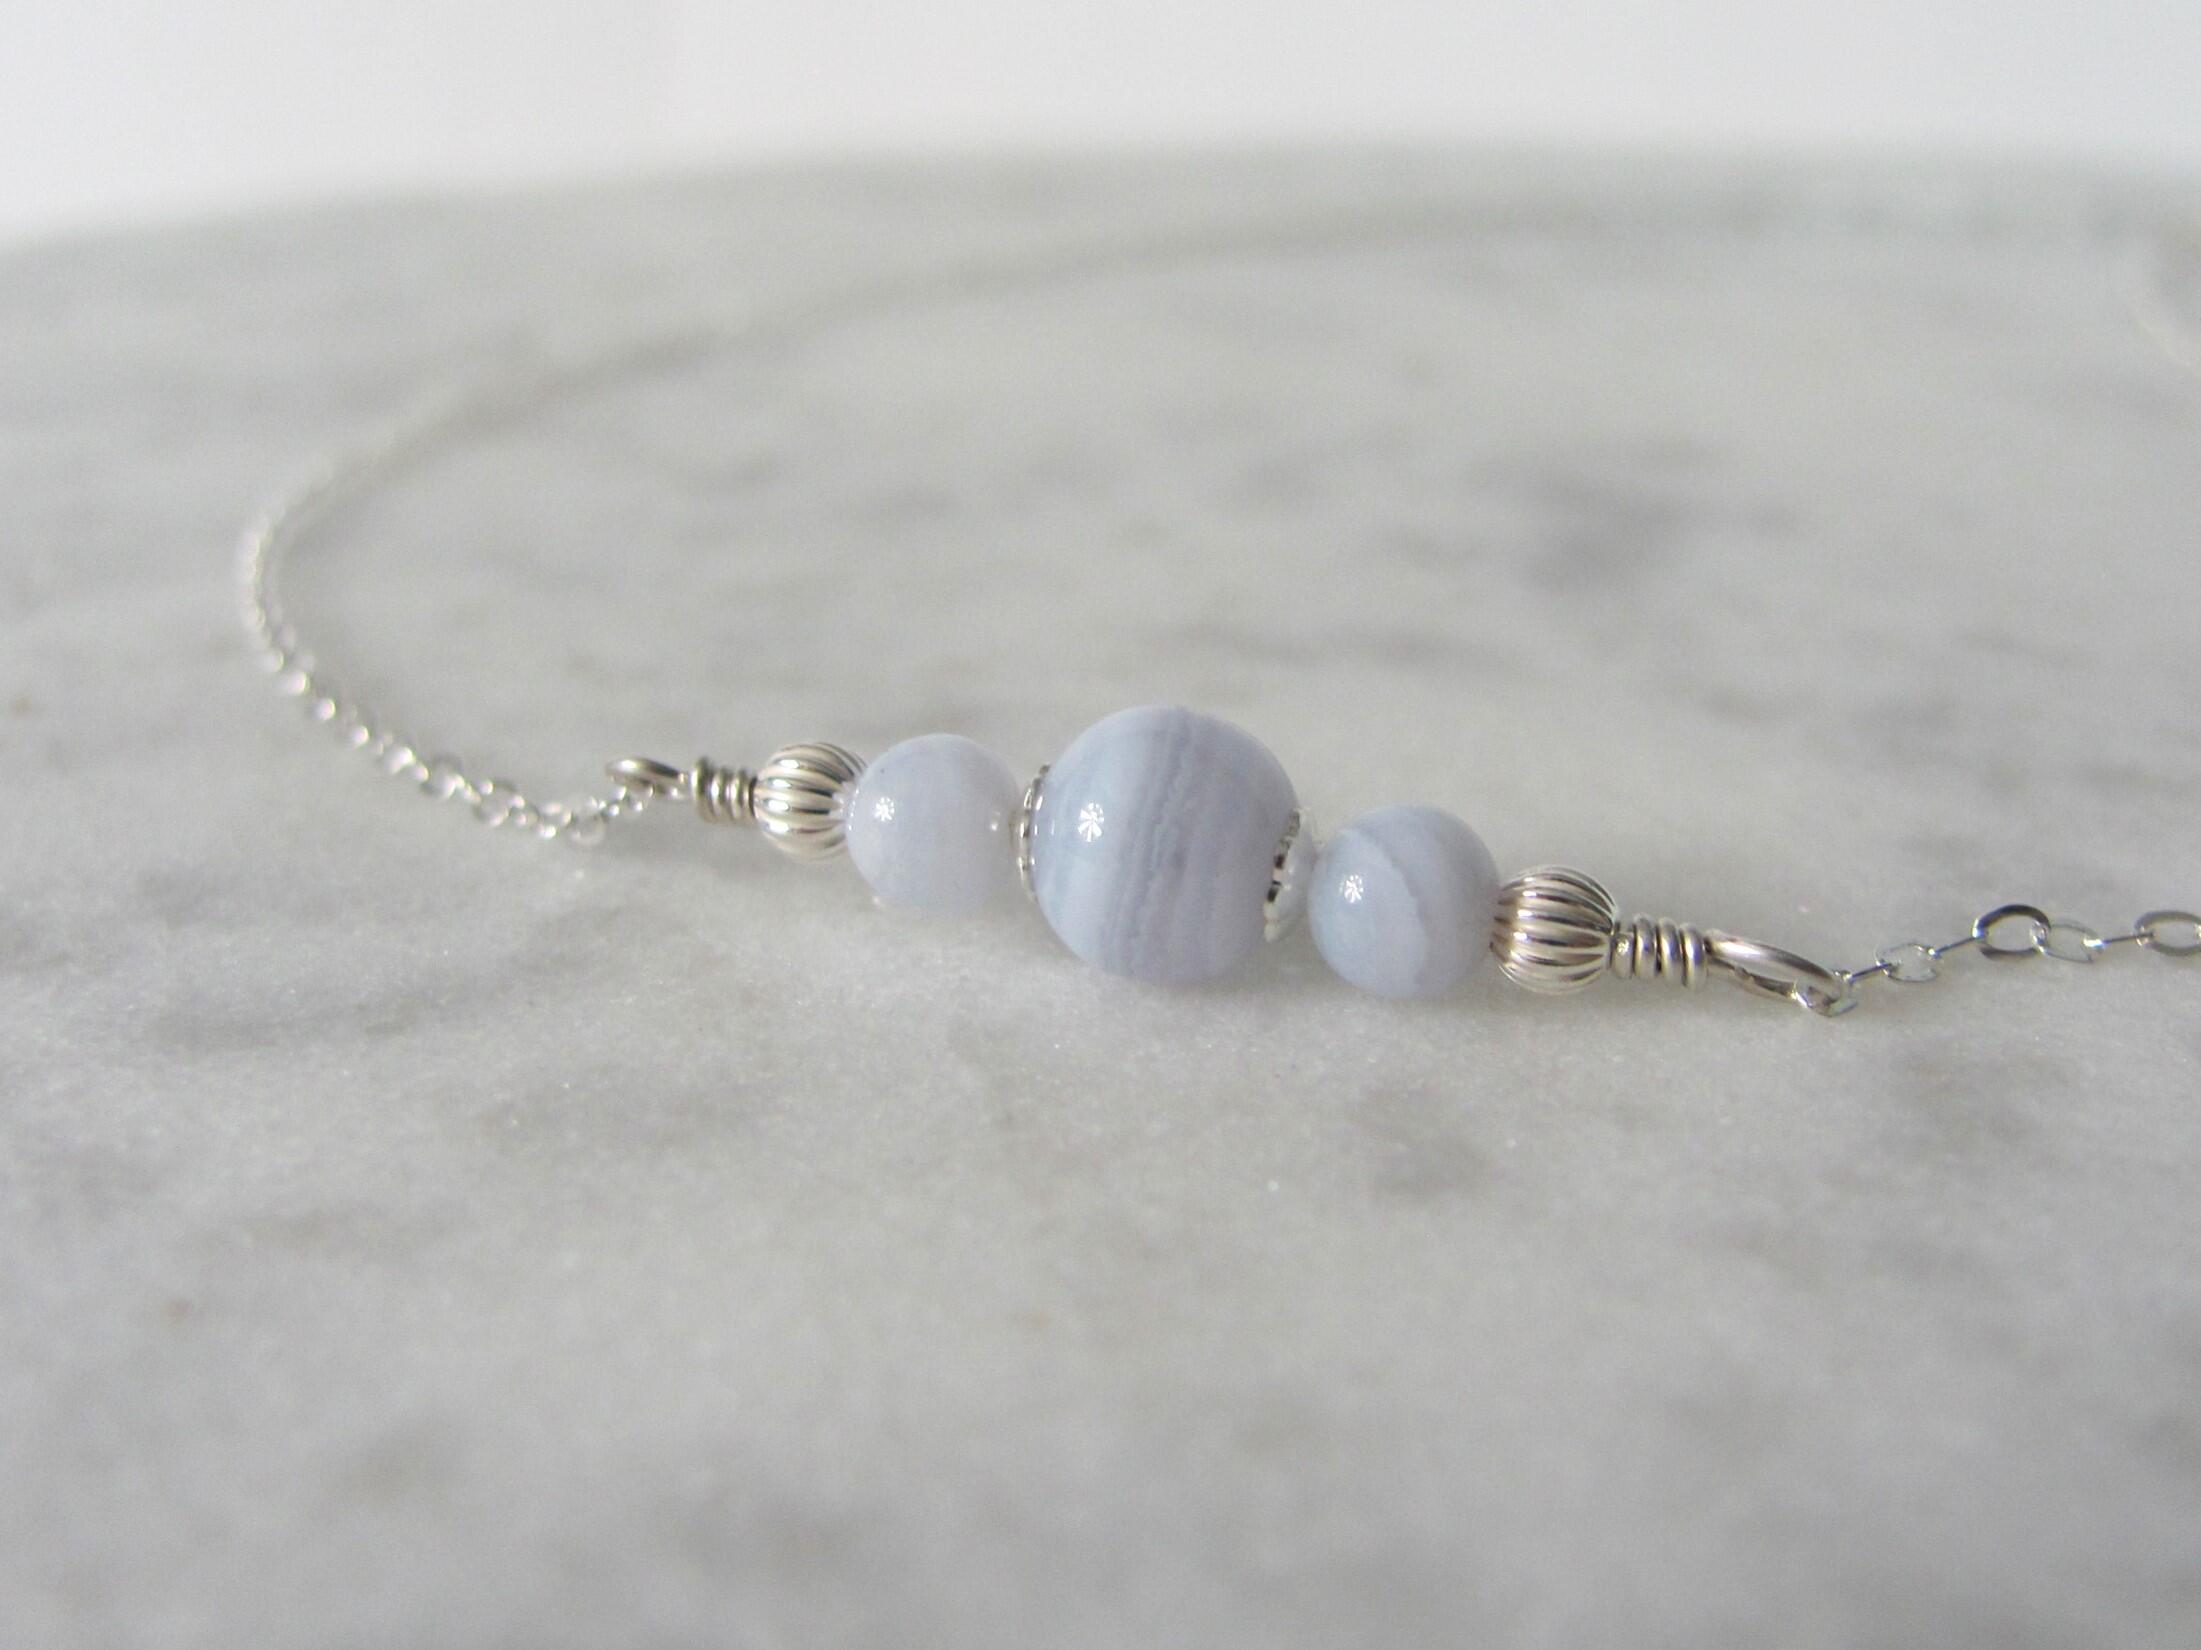 Blue Lace Agate Choker Necklace in Sterling Silver